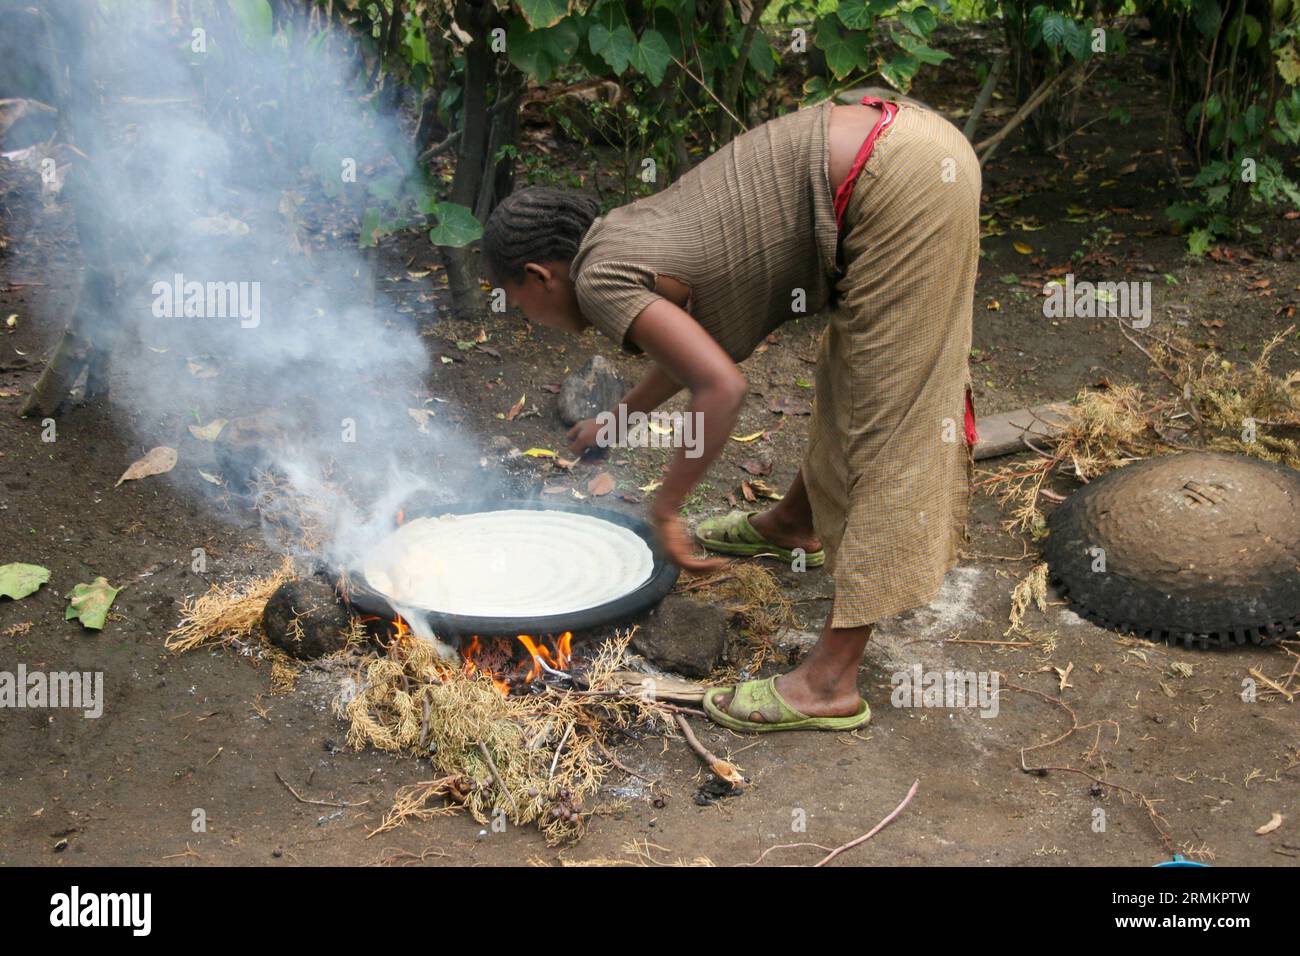 Woman cooking Injera (pancake like bread) on a mogogo over a fire at the market town of Jinka, Omo Valley, Ethiopia Stock Photo